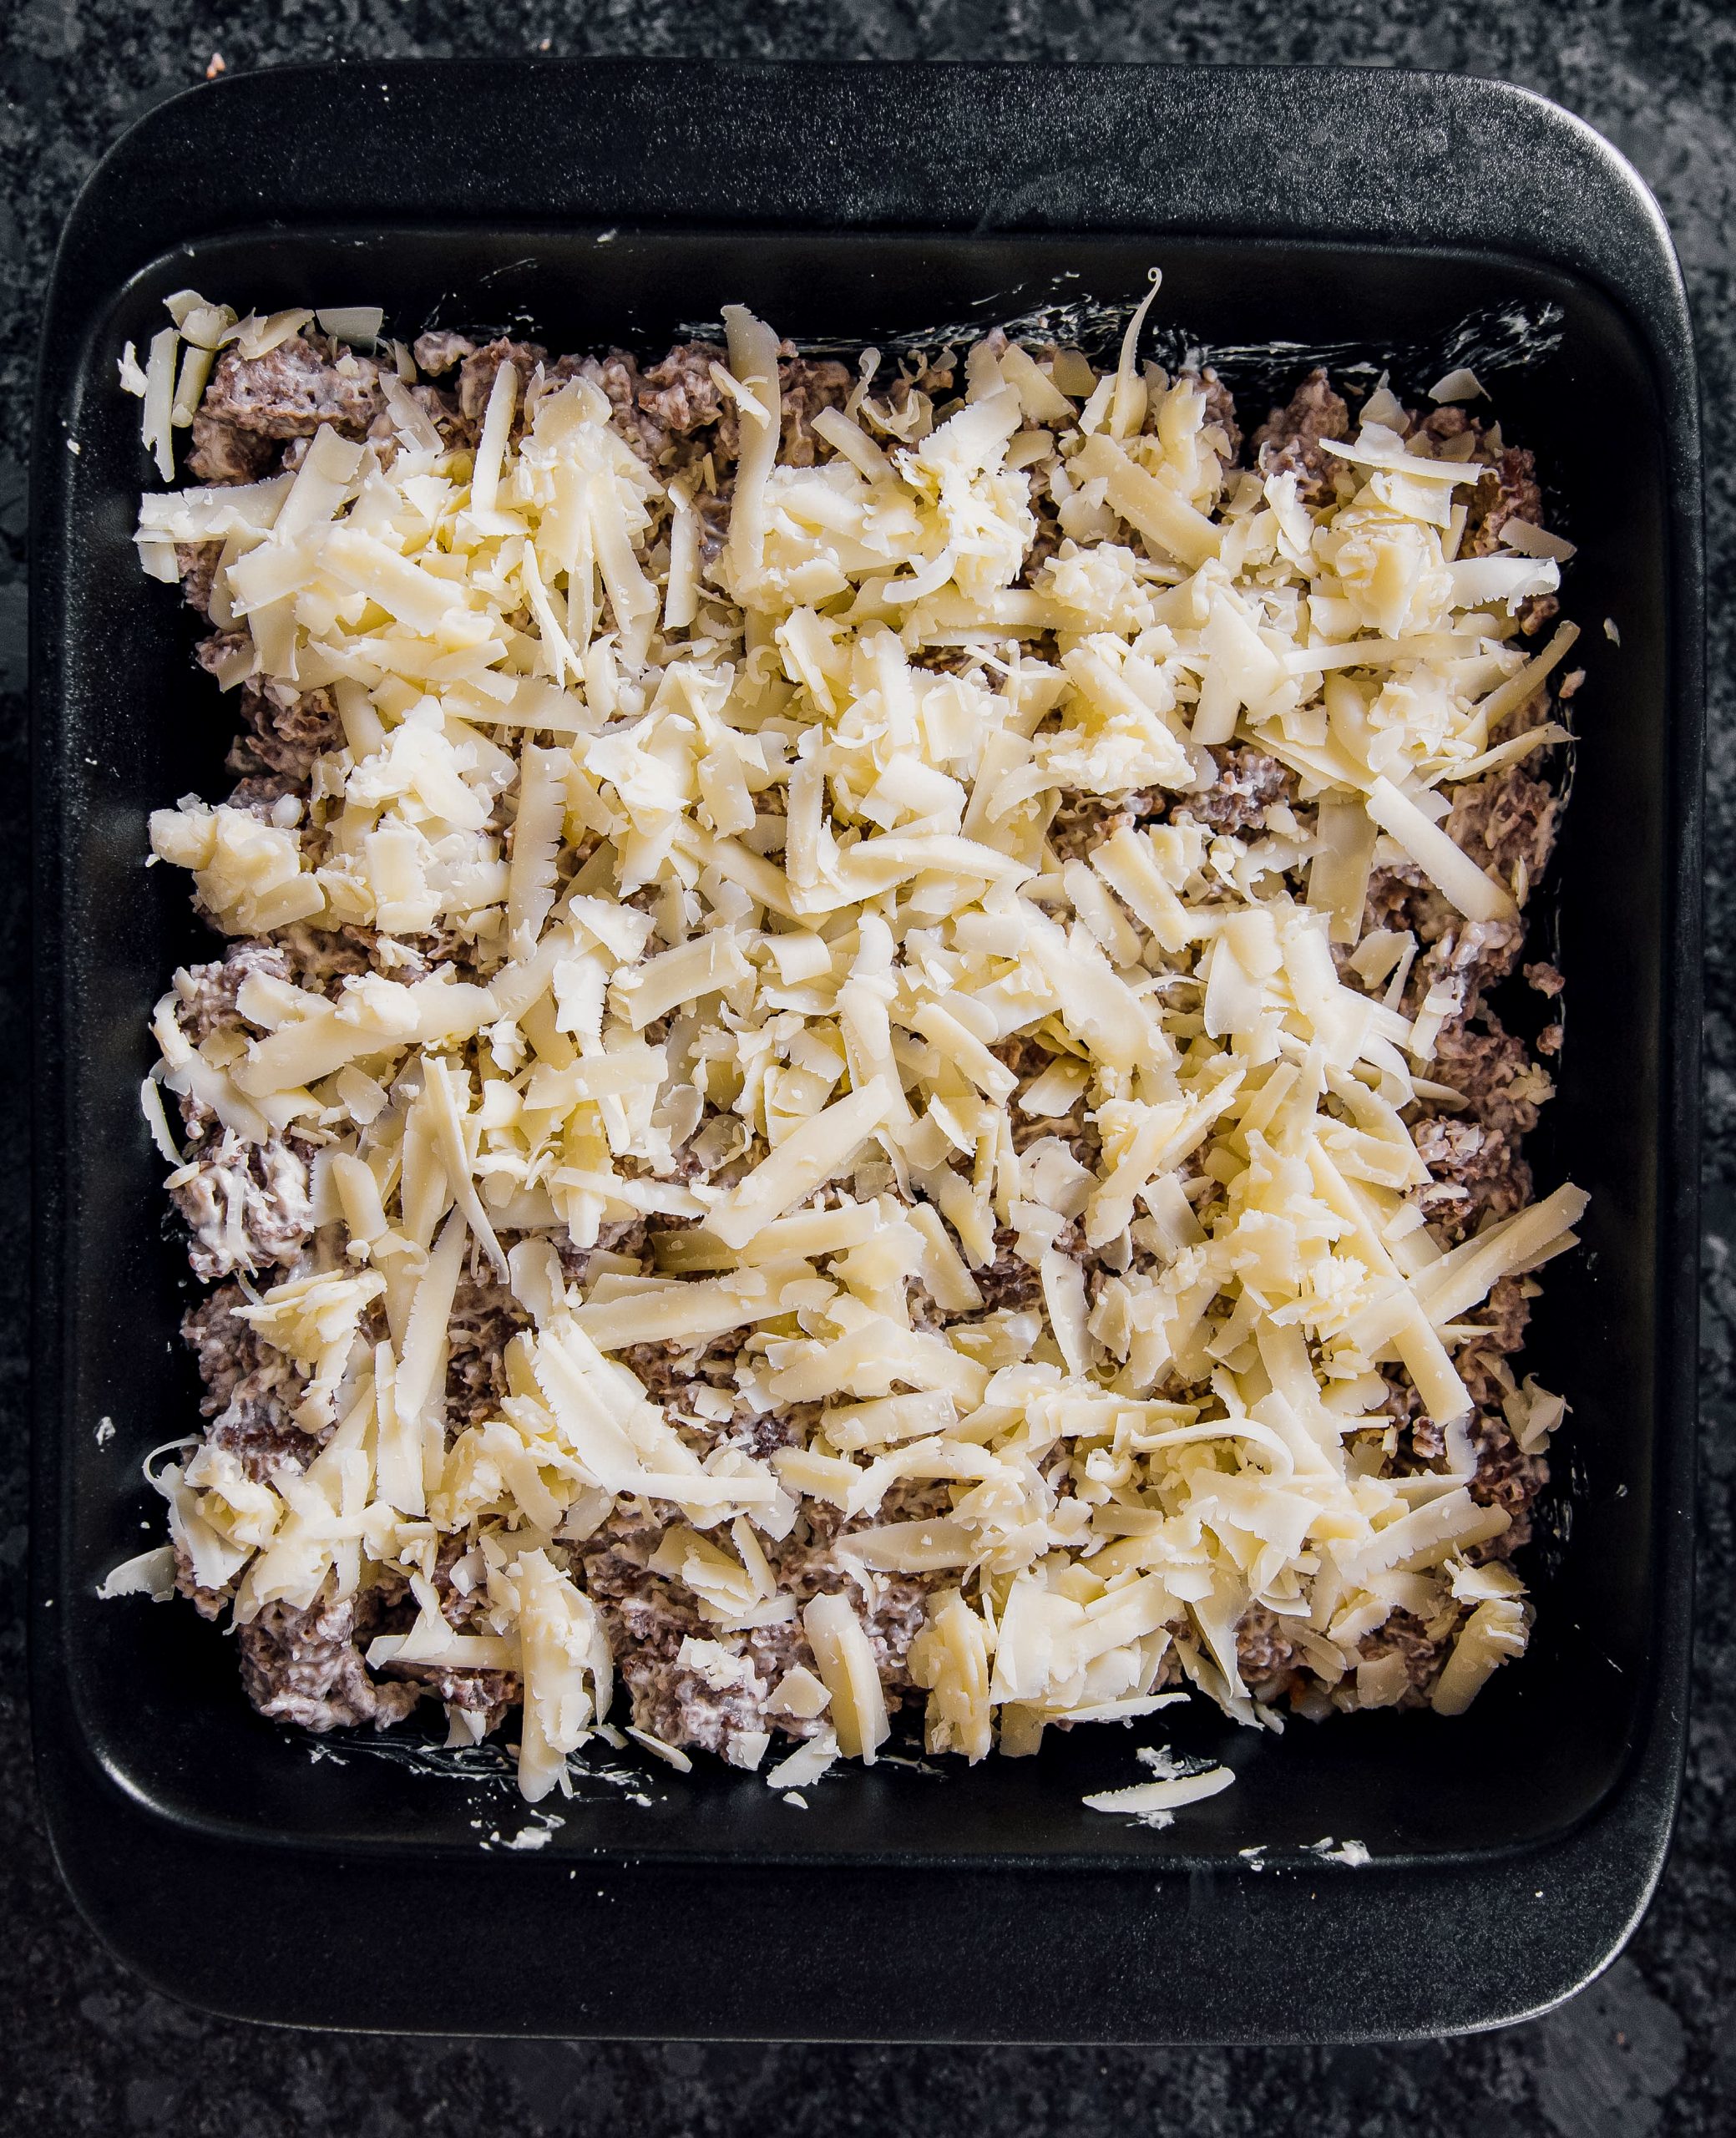 Put the cream cheese and sausage on top of the hash browns, then top with shredded cheese.